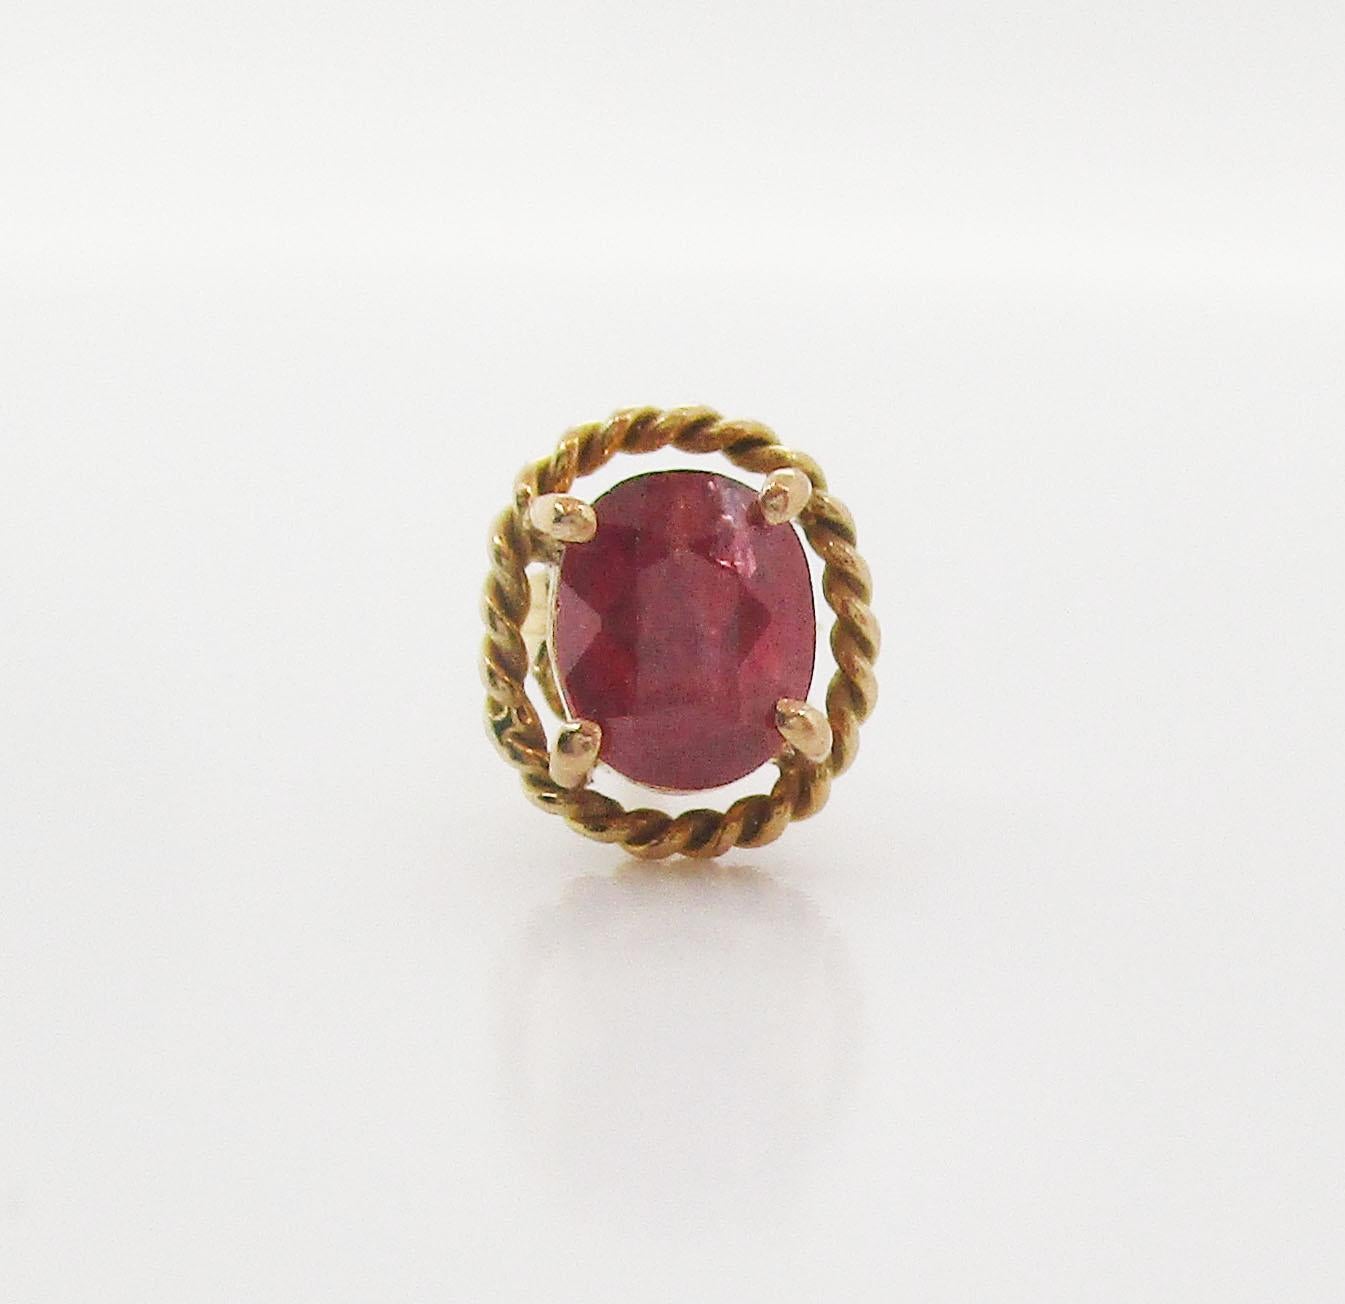 This is a beautiful pair of mid-century stud earrings in 14k yellow gold featuring bright red ruby centers! The rubies are a classic oval shape in a four-prong setting that is surrounded by a twist wire frame with an element of negative space